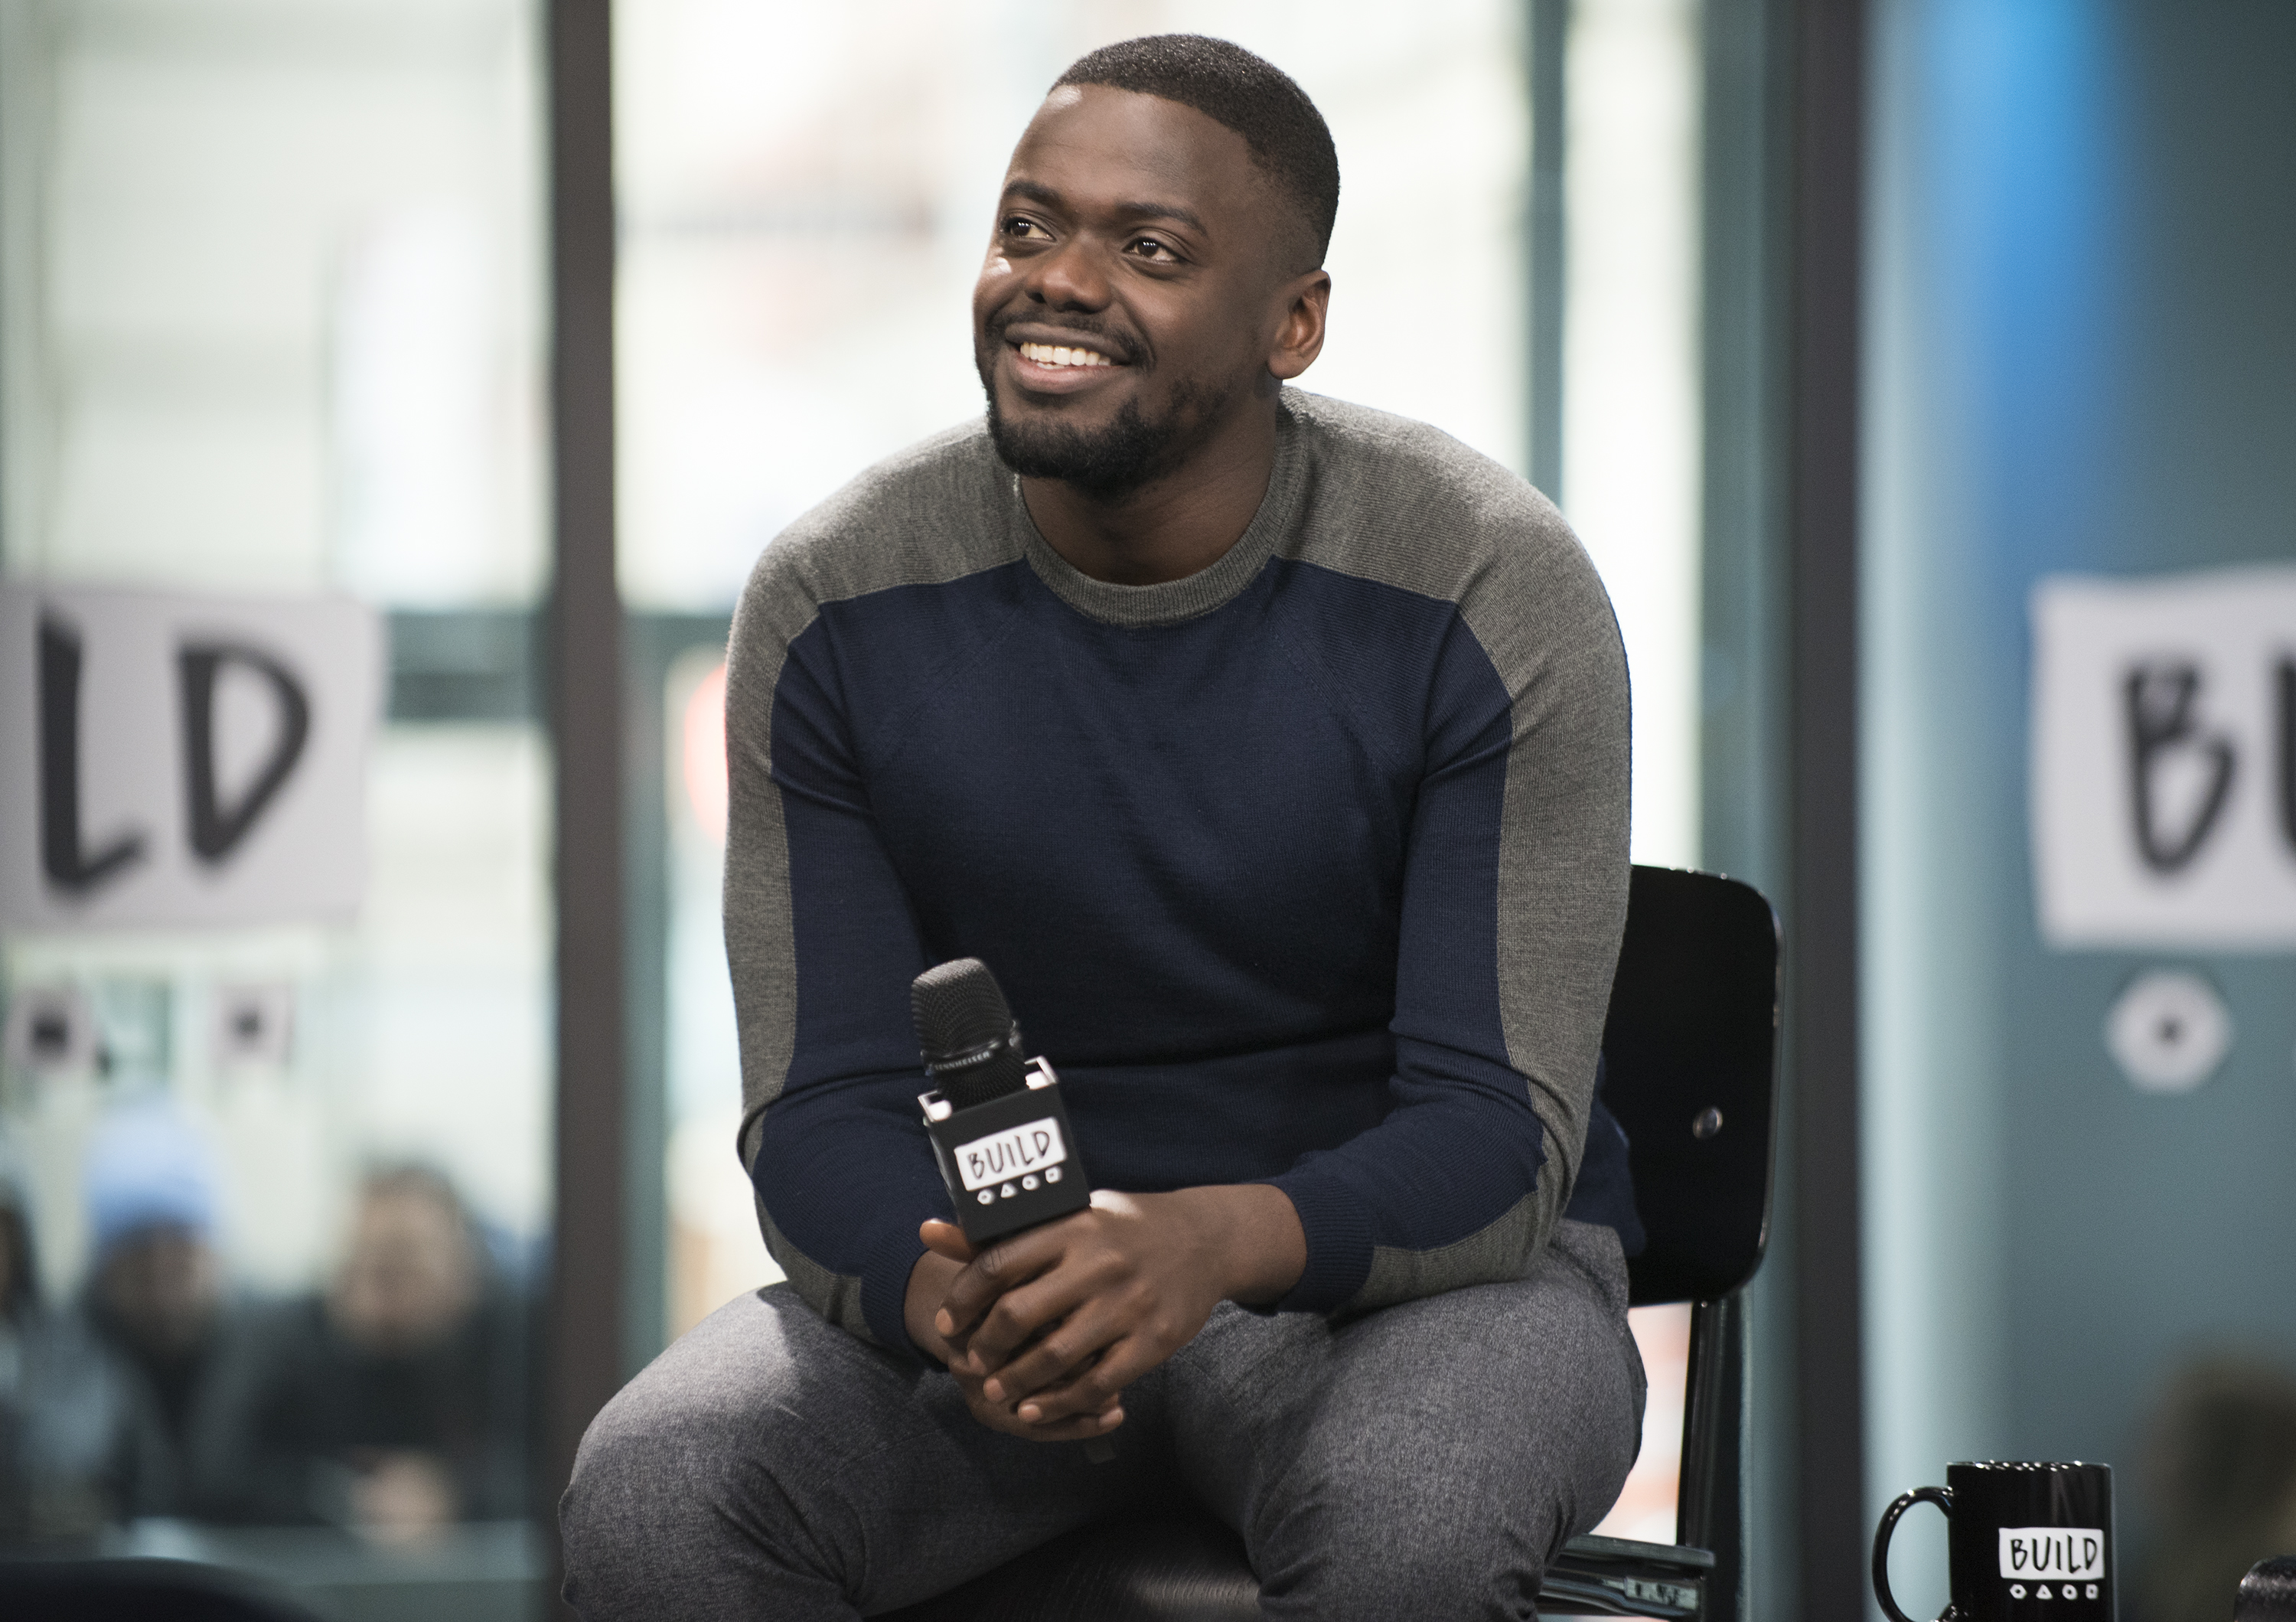 Daniel Kaluuya attends the Build Series to discuss his new film "Get Out" at Build Studio on February 21, 2017 in New York City. (Jenny Anderson—WireImage)